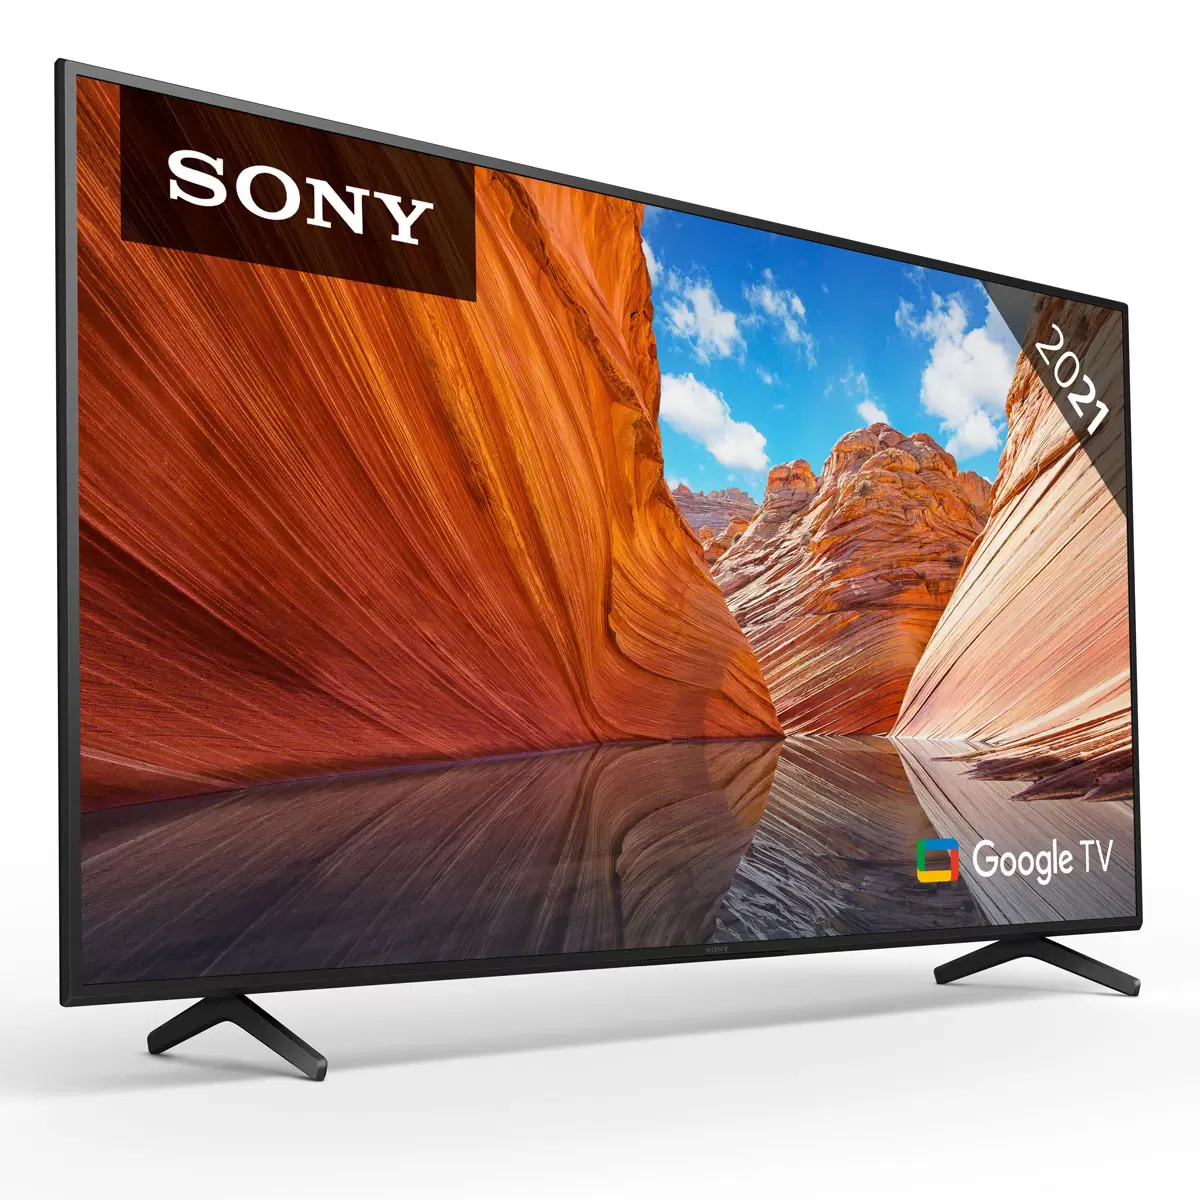 Buy Sony KD75X81JU 75 inch 4K Ultra HD Smart Android  TV at costco.co.uk